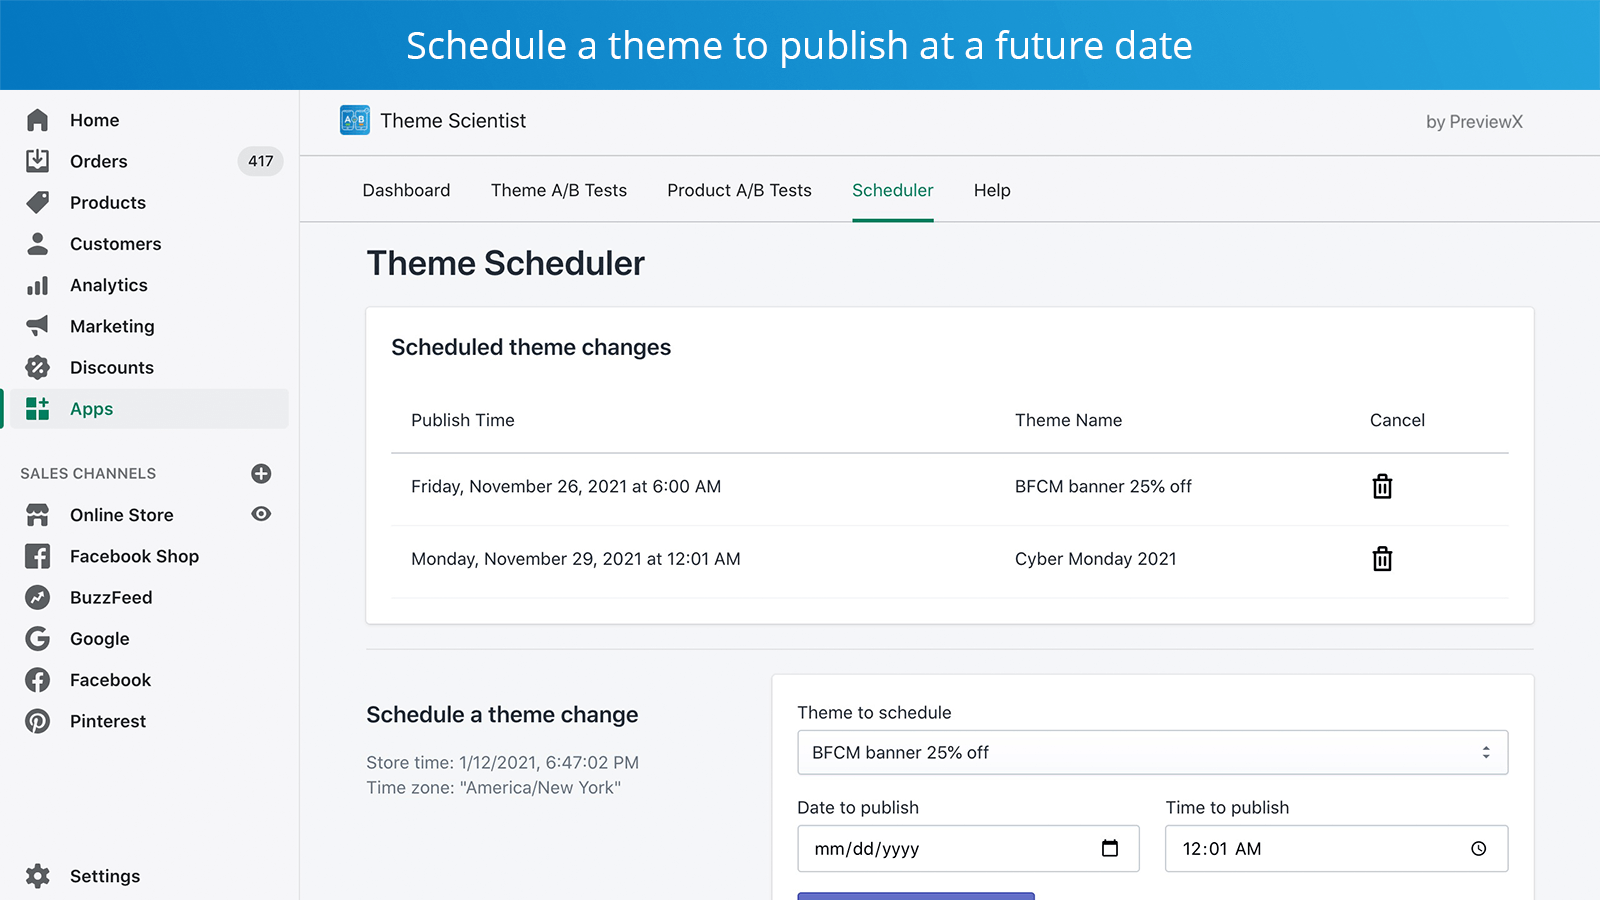 Schedule a theme to publish in the future at a specific time